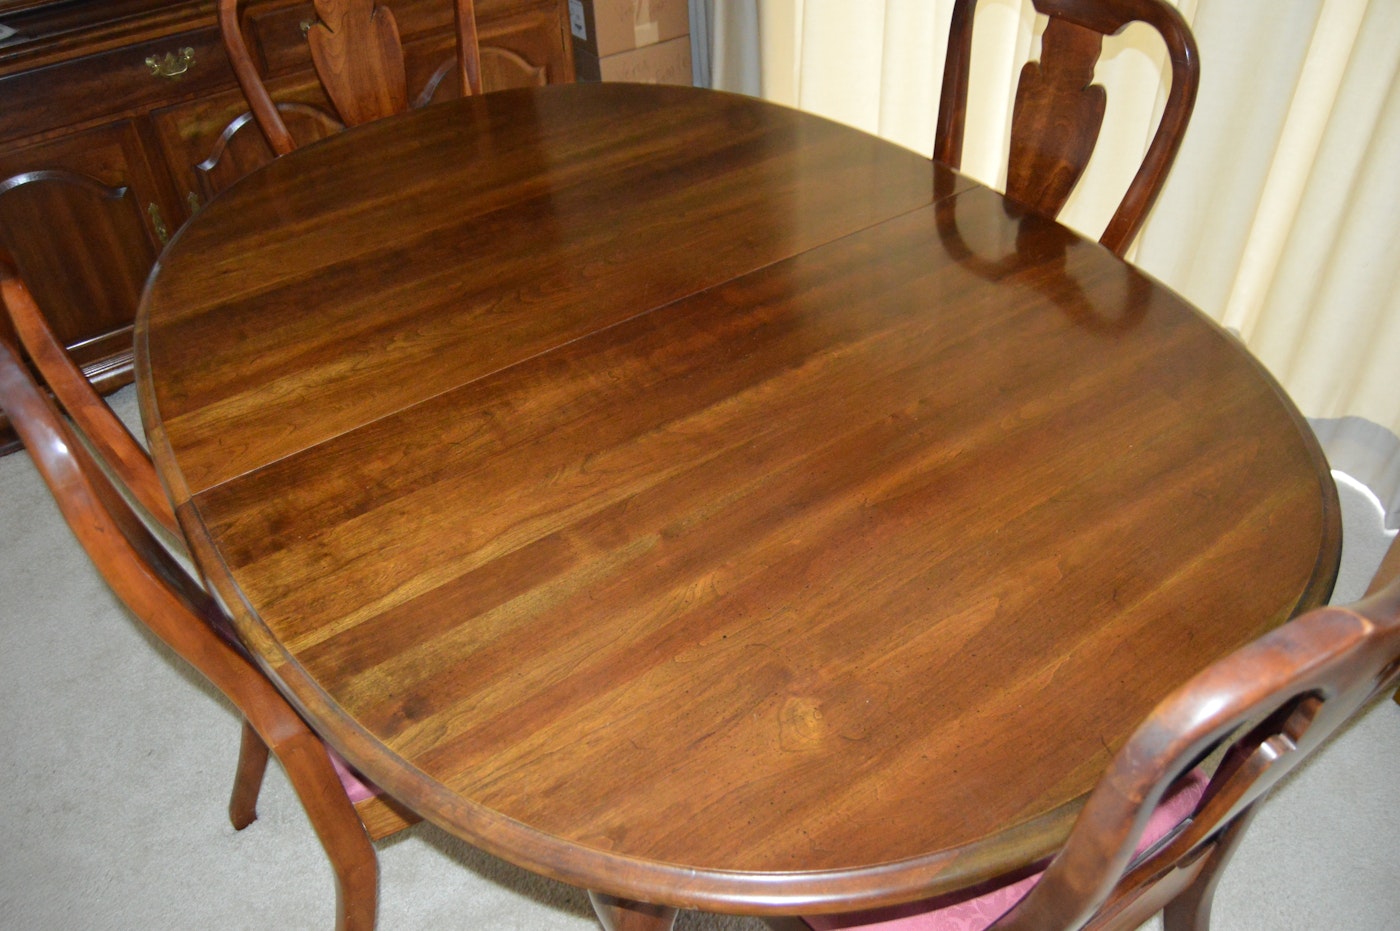 cresent dining room table